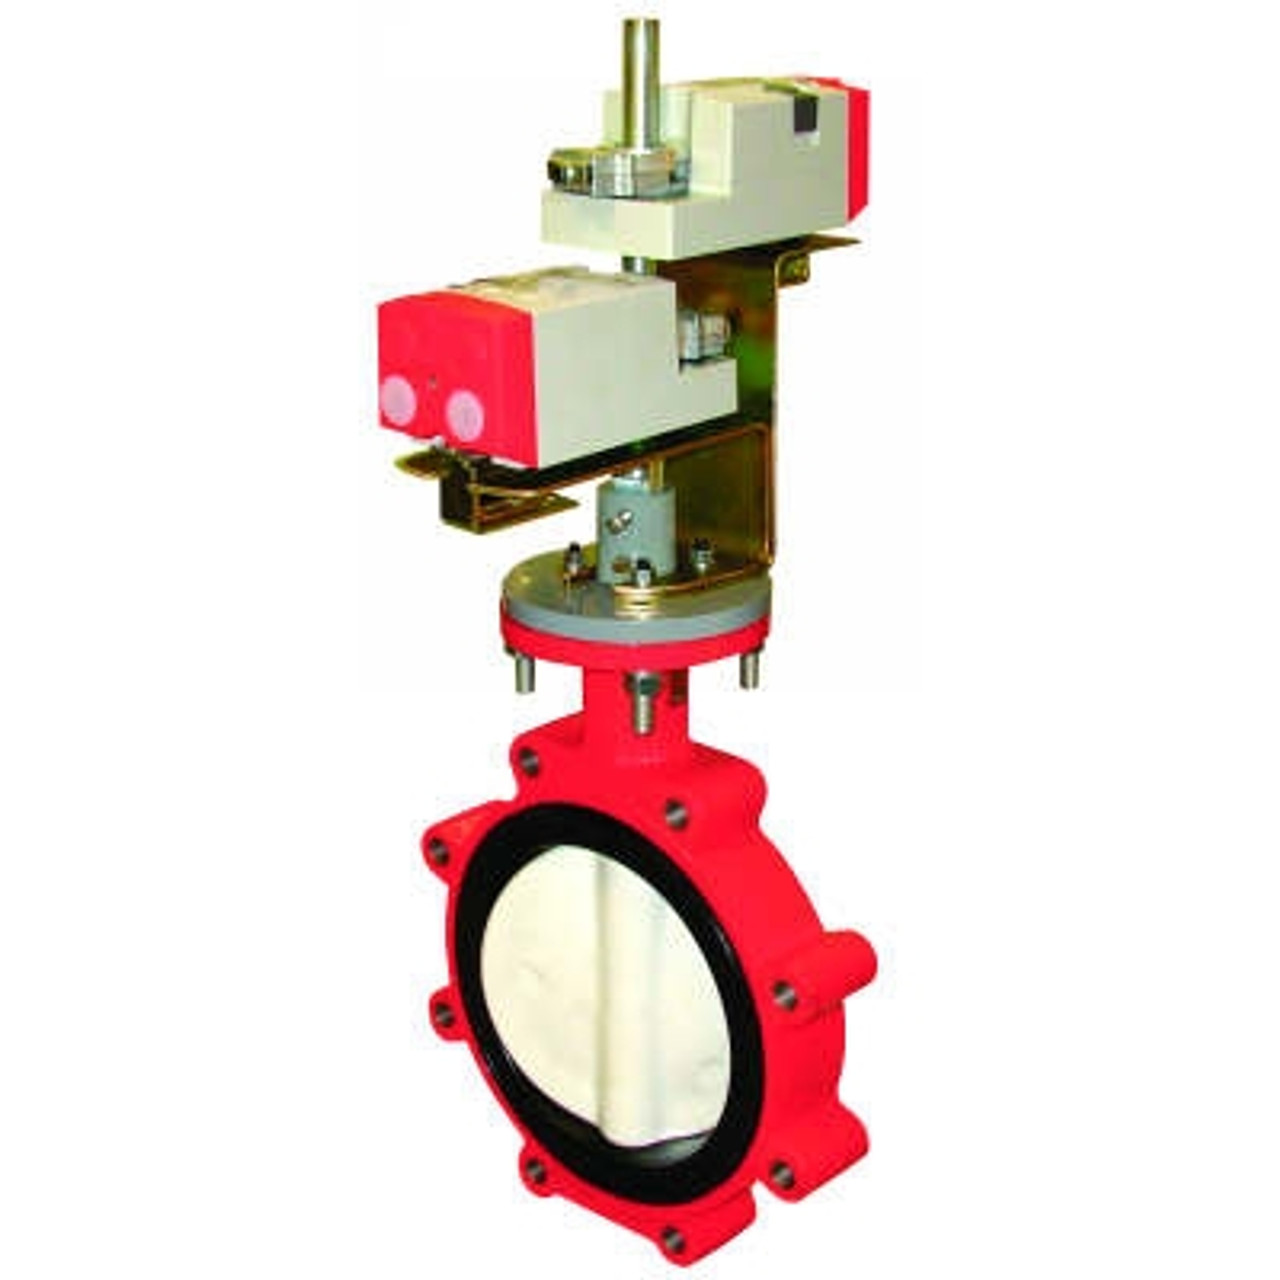 HONEYWELL VFF2HW1YPR 2-way 3 inch resilient-seat flanged butterfly valve 175 psid